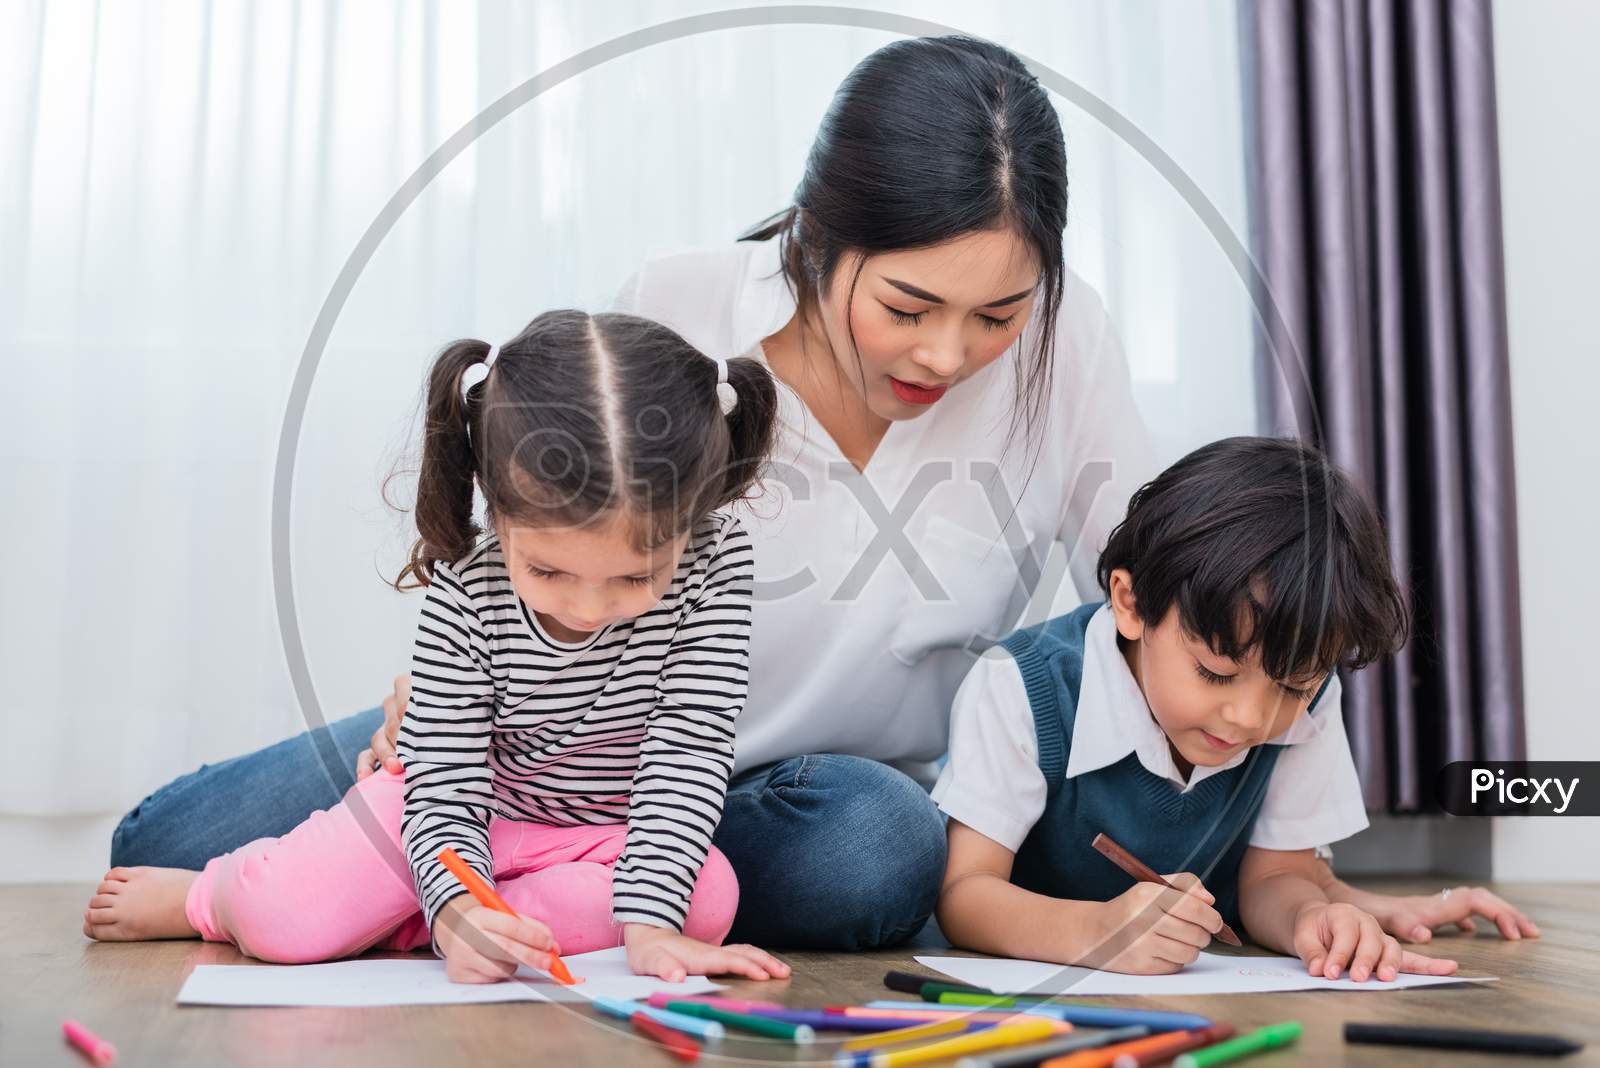 Mother Teaching Children In Drawing Class. Daughter And Son Painting With Colorful Crayon Color In Home. Teacher Training Students In Art Classroom. Education And Learning Development Of Kids Theme.